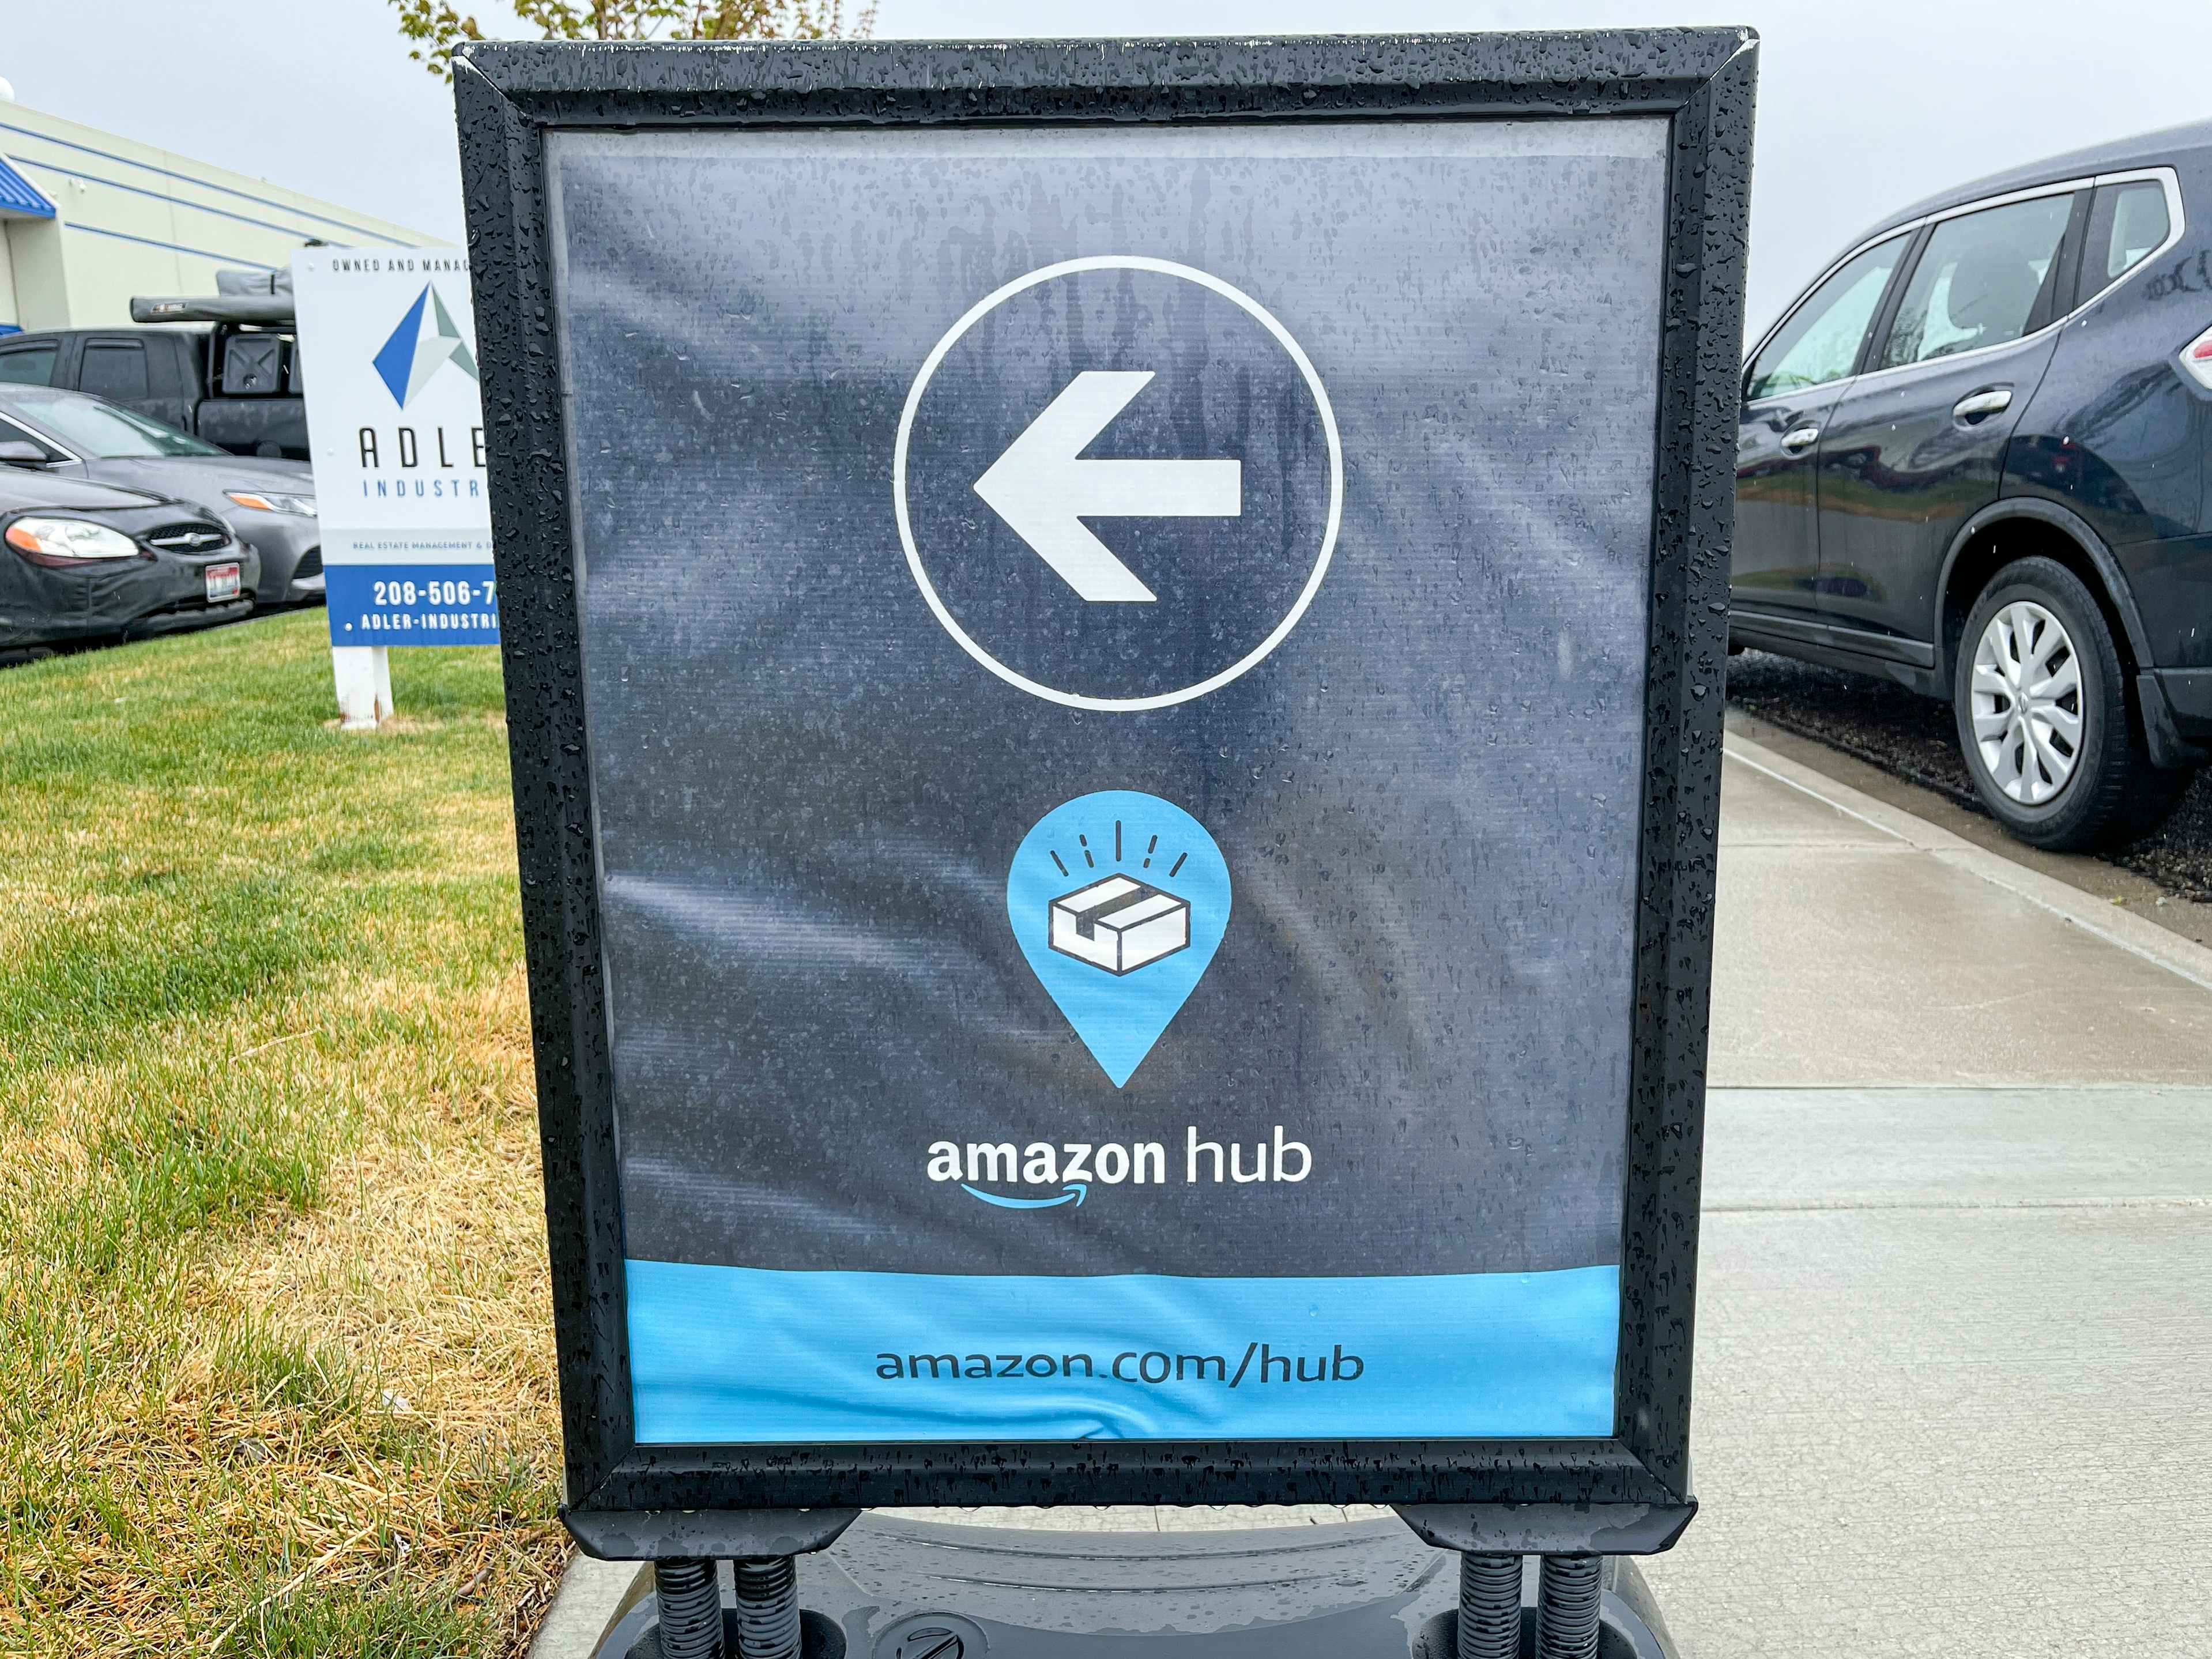 A sign pointing to an amazon hub location.